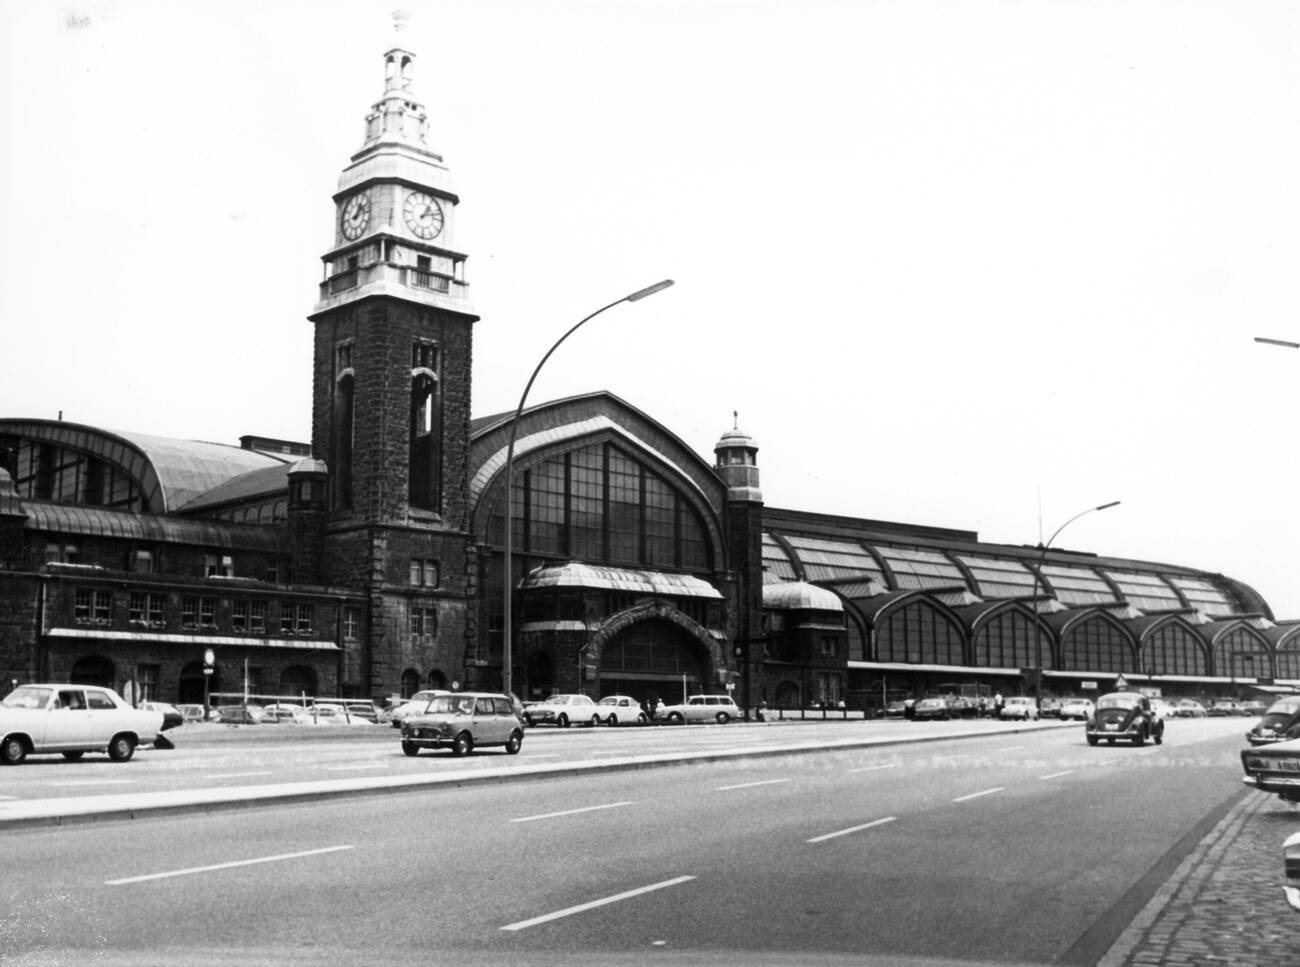 The central station in Hamburg, Germany, built by Heinrich Reinhardt and Georg Süssenguth, in 1904-1906, viewed from the west side in the 1970s.